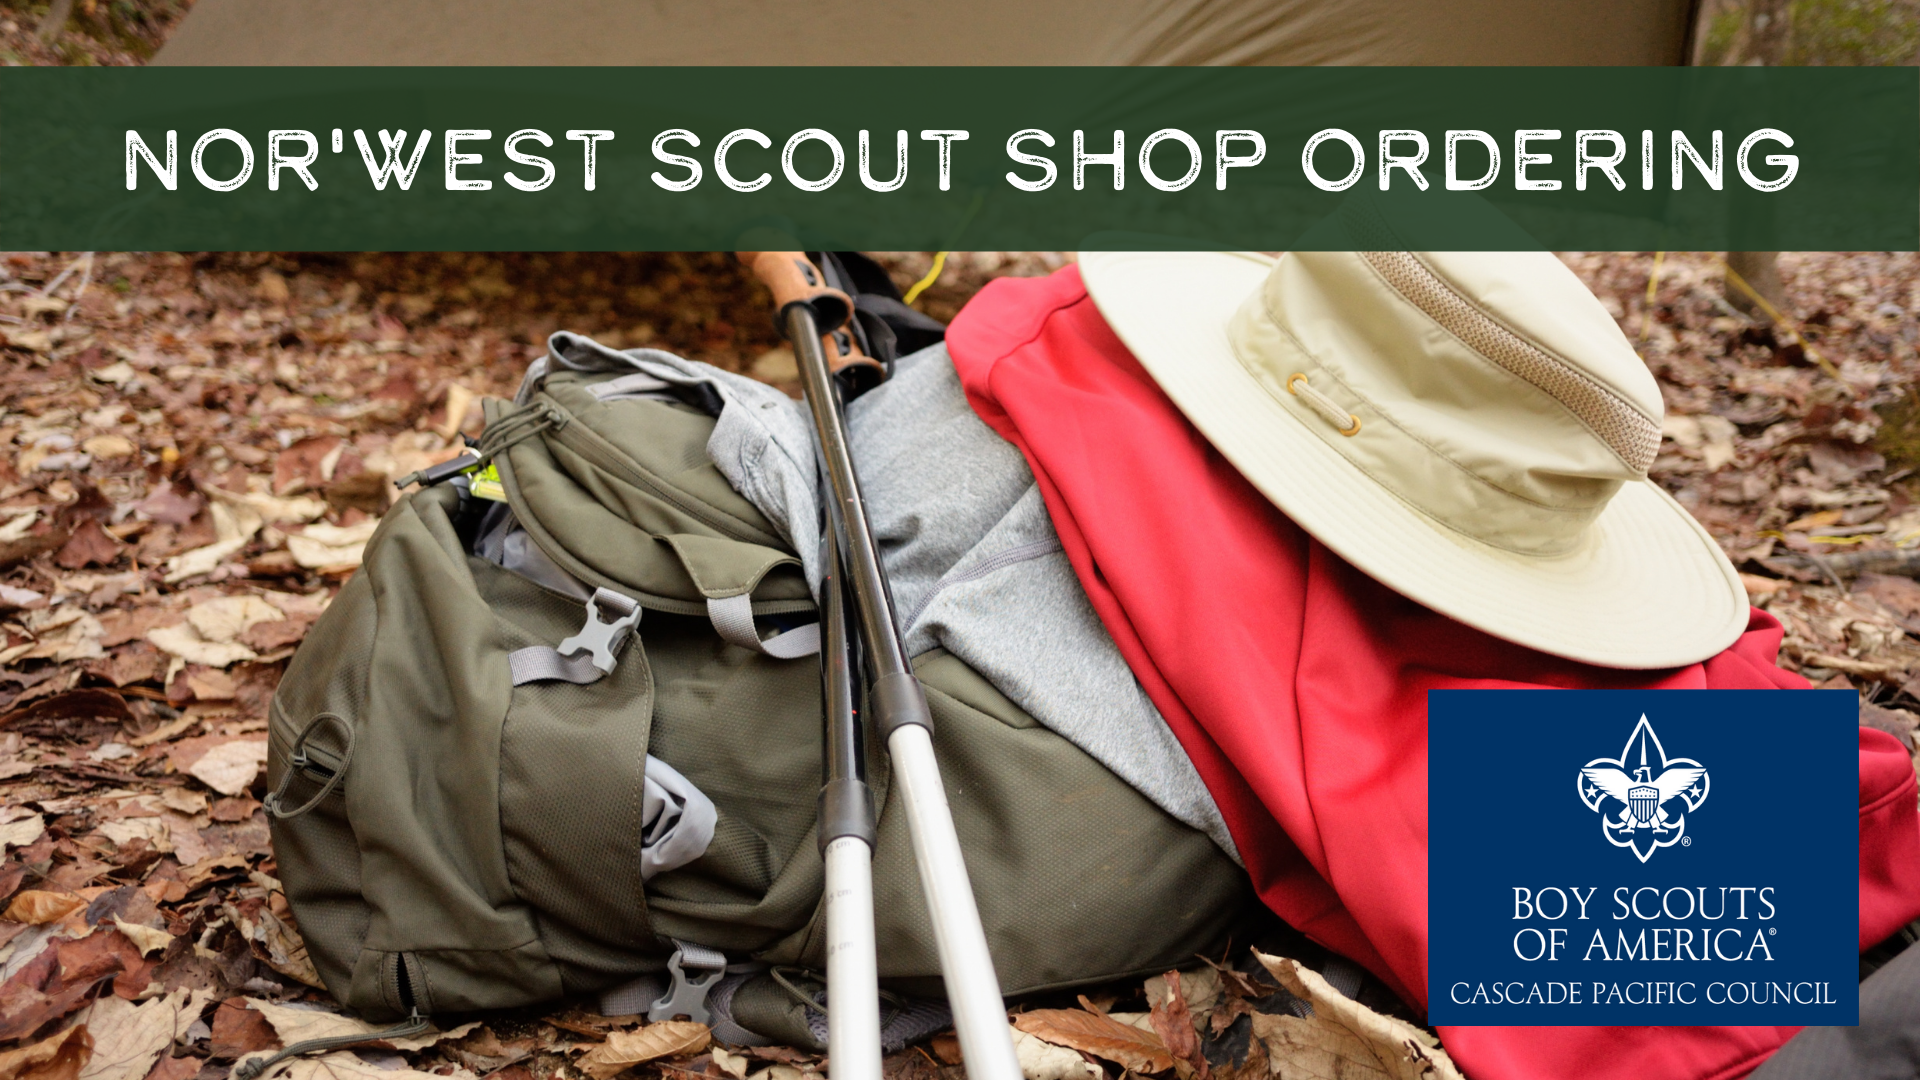 Webinar: Shopping at the Nor’West Scout Shop